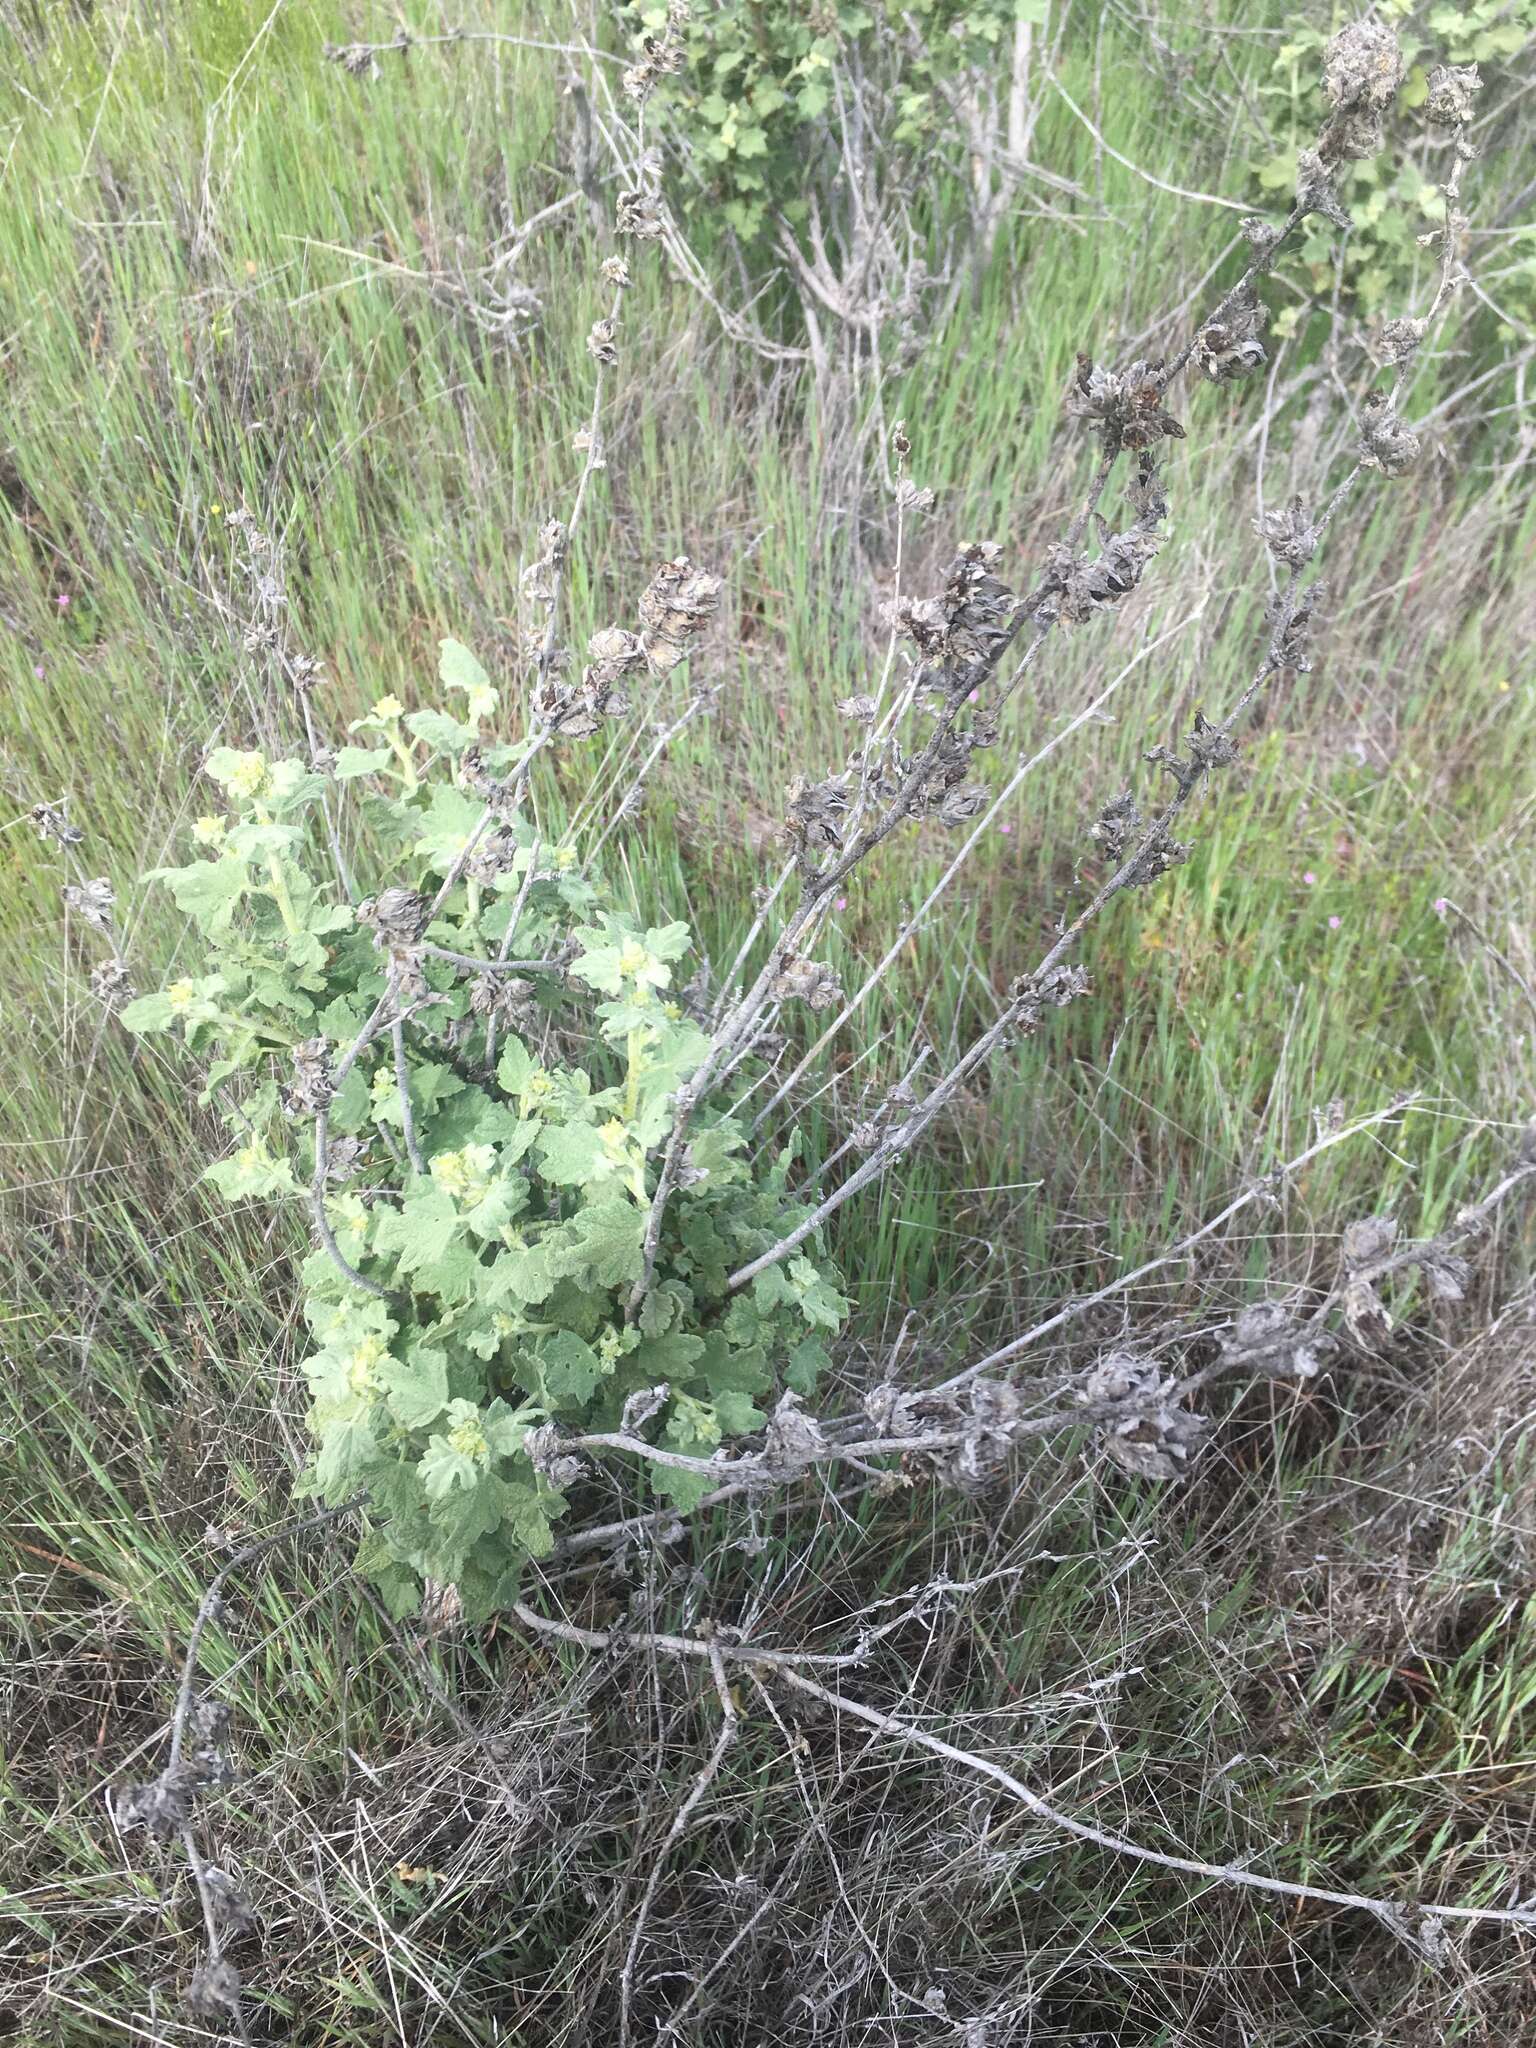 Image of Indian Valley bushmallow